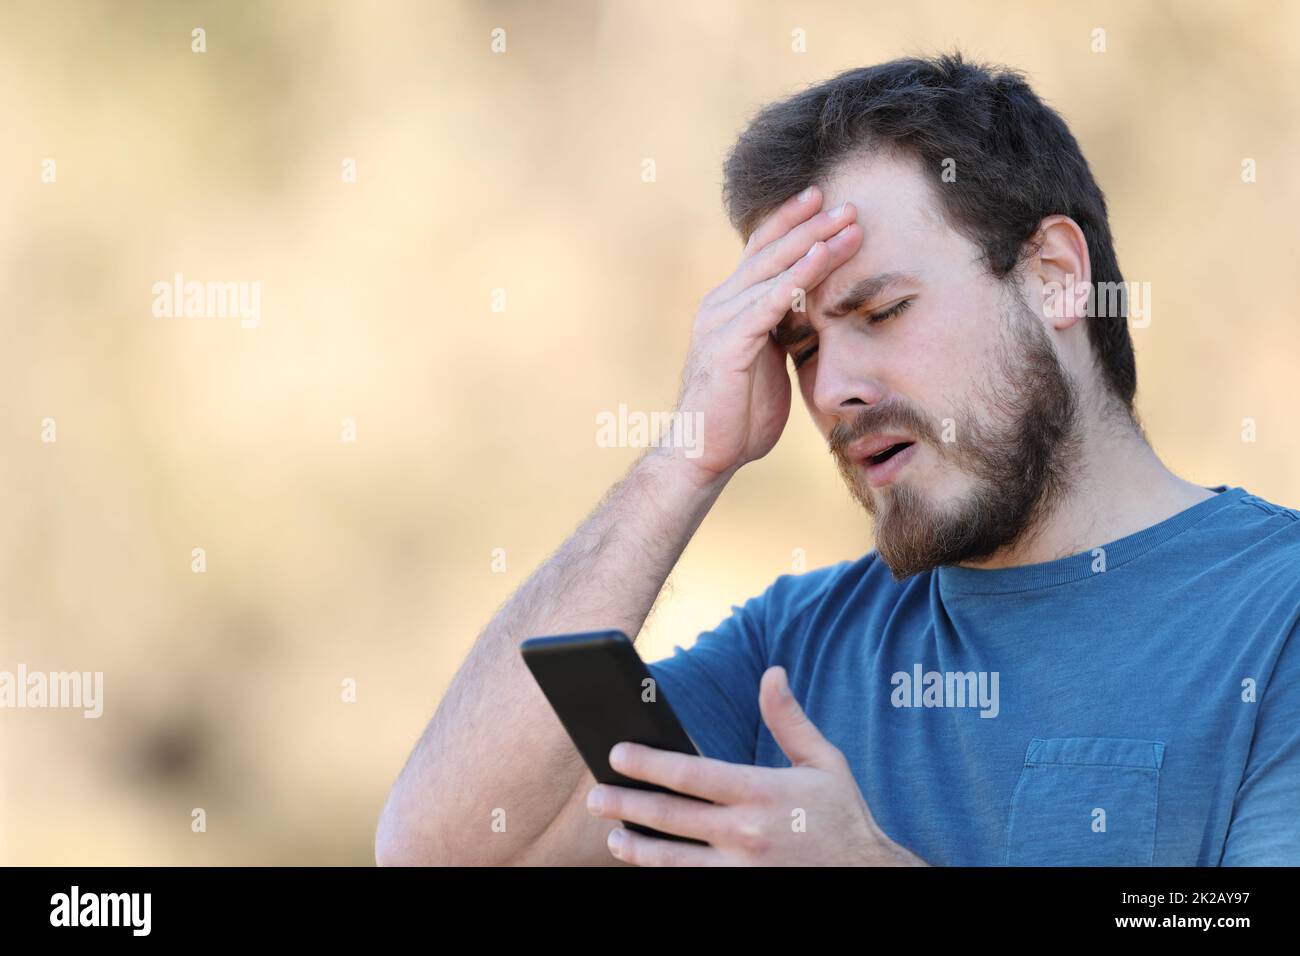 Worried man complaining looking at phone Stock Photo